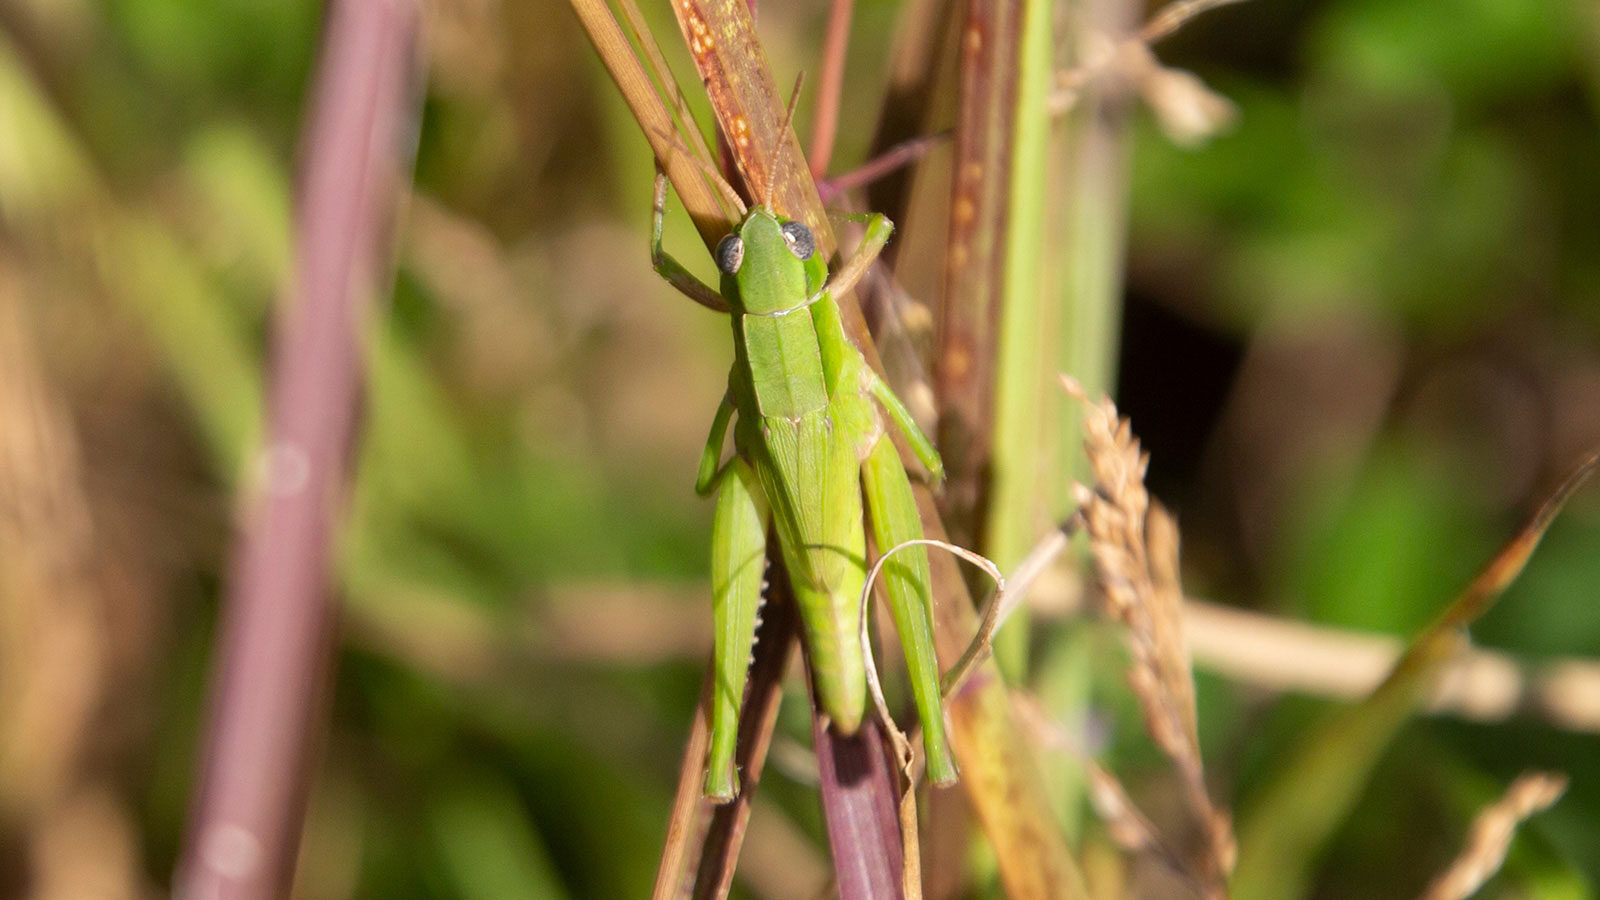 Short-winged grasshopper clinging to a tall weed